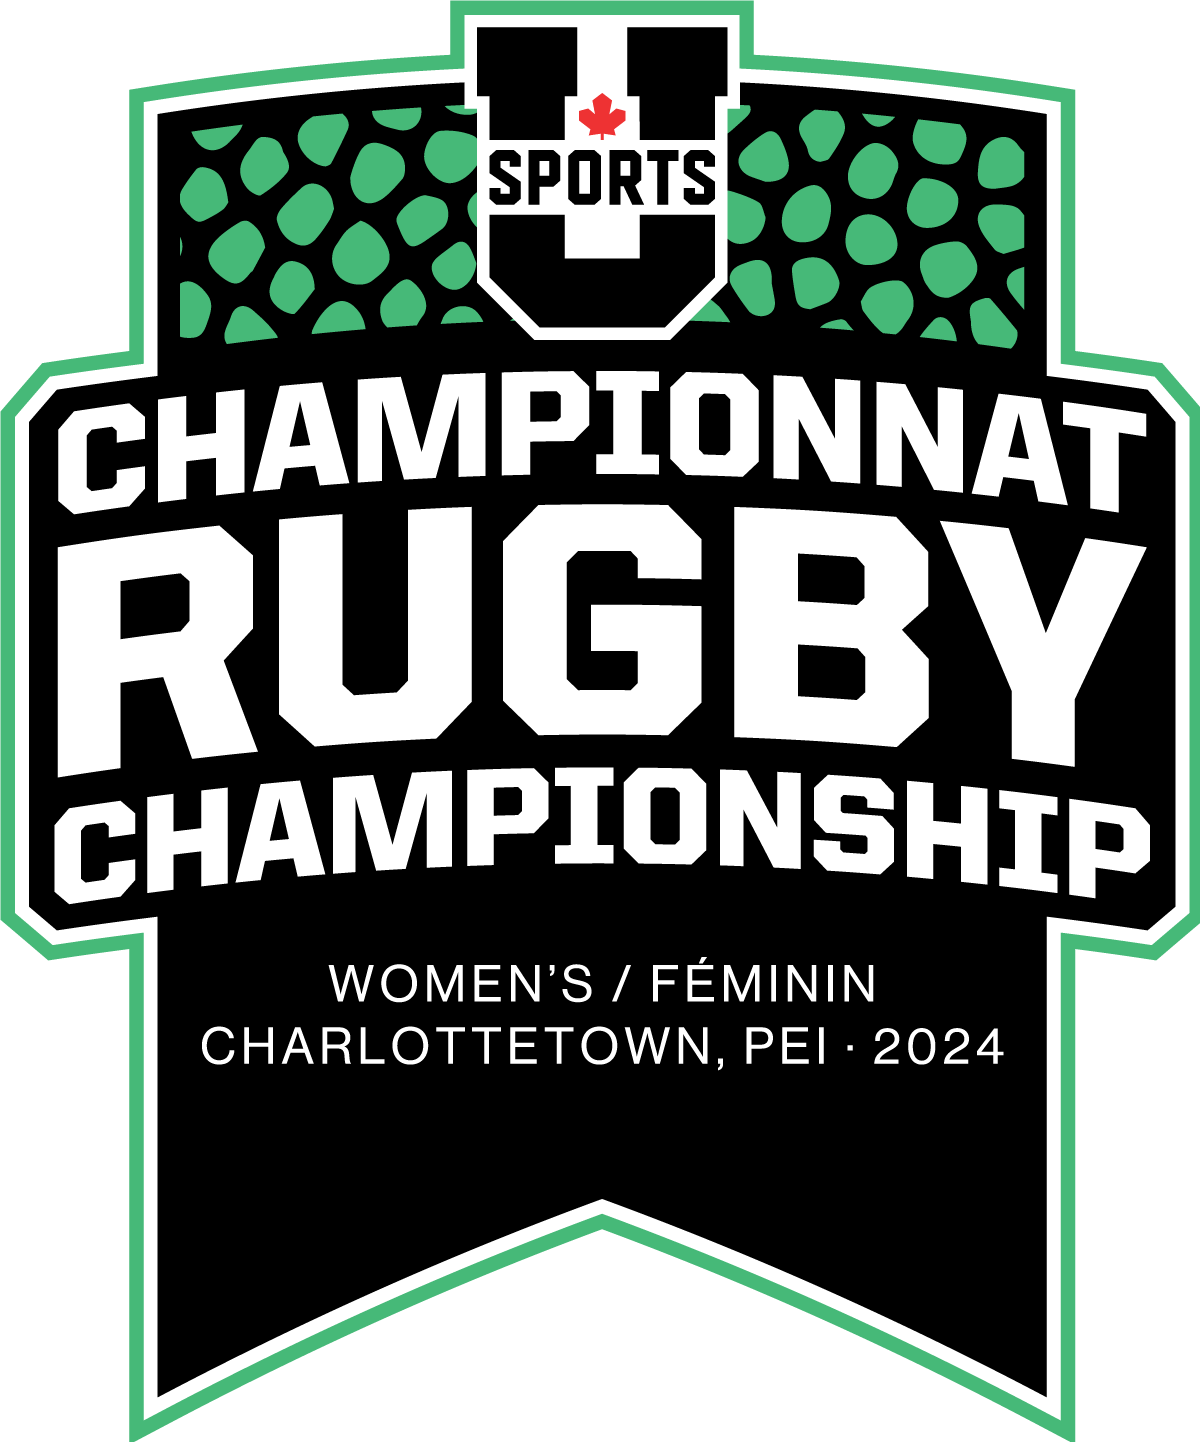 USports_Champ2425_Rugby_Primary_CMYK_BL.png (91 KB)